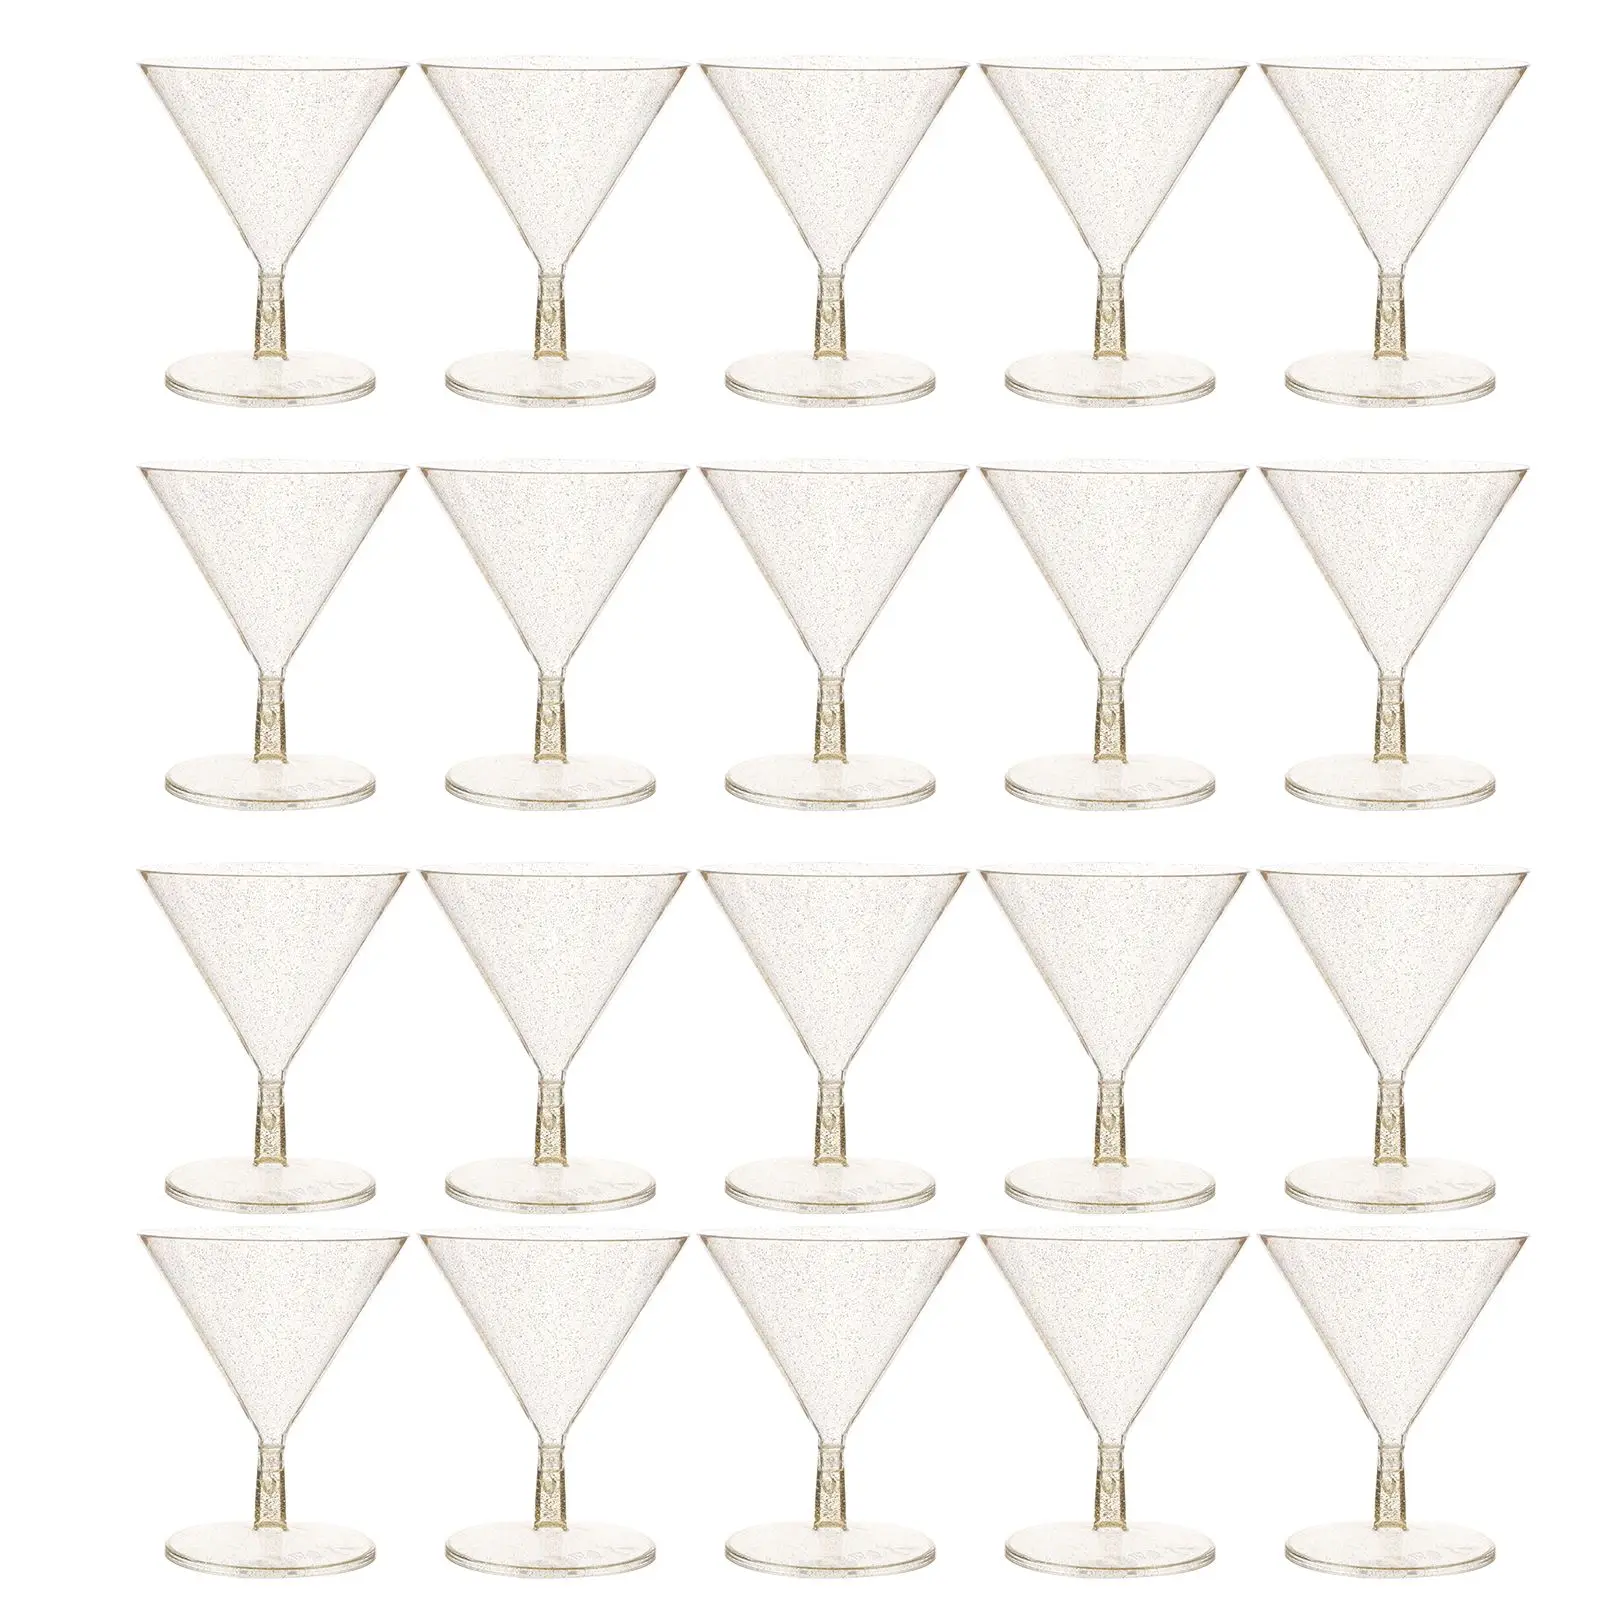 

Plastic Cups Glasses Goblets Drink Stemmed Ice Goblet Fancy Party Champagne Cream Footed Clear Bowls Trifle Cocktail Stem